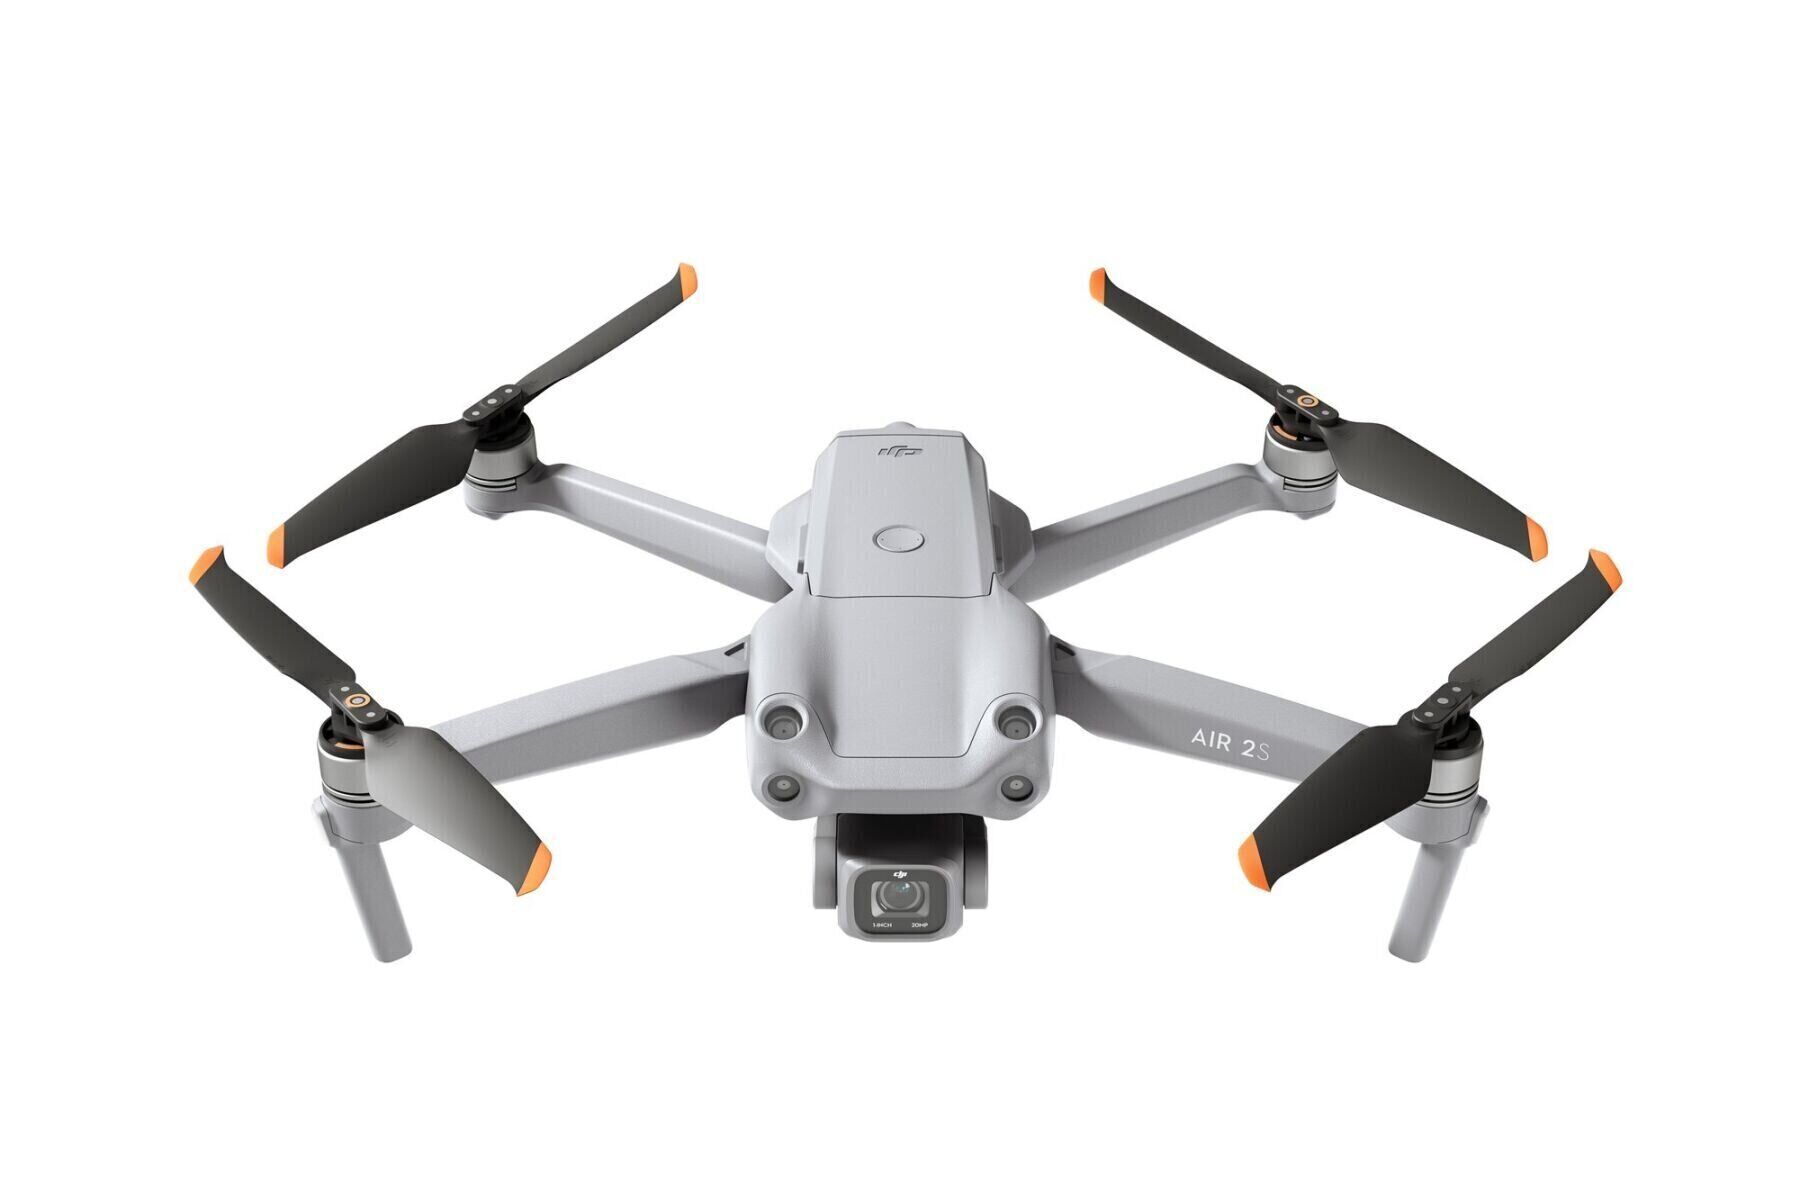  DJI Air 2S Fly More Combo (Smart Controller)